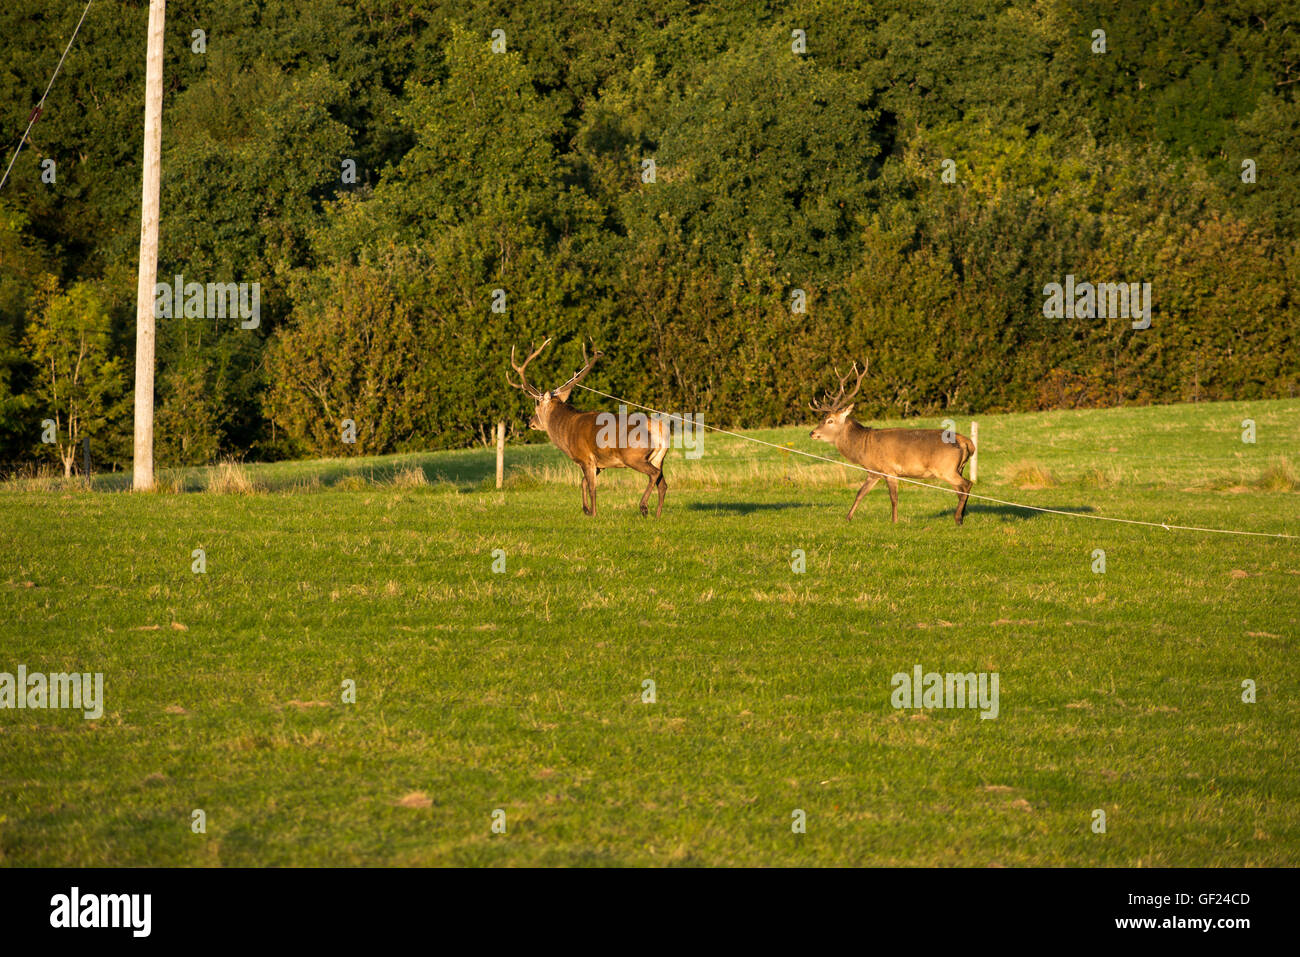 Red deer or Cervus Elaphus in trouble having a wire around its antlers in Killarney National Park, County Kerry, Ireland Stock Photo